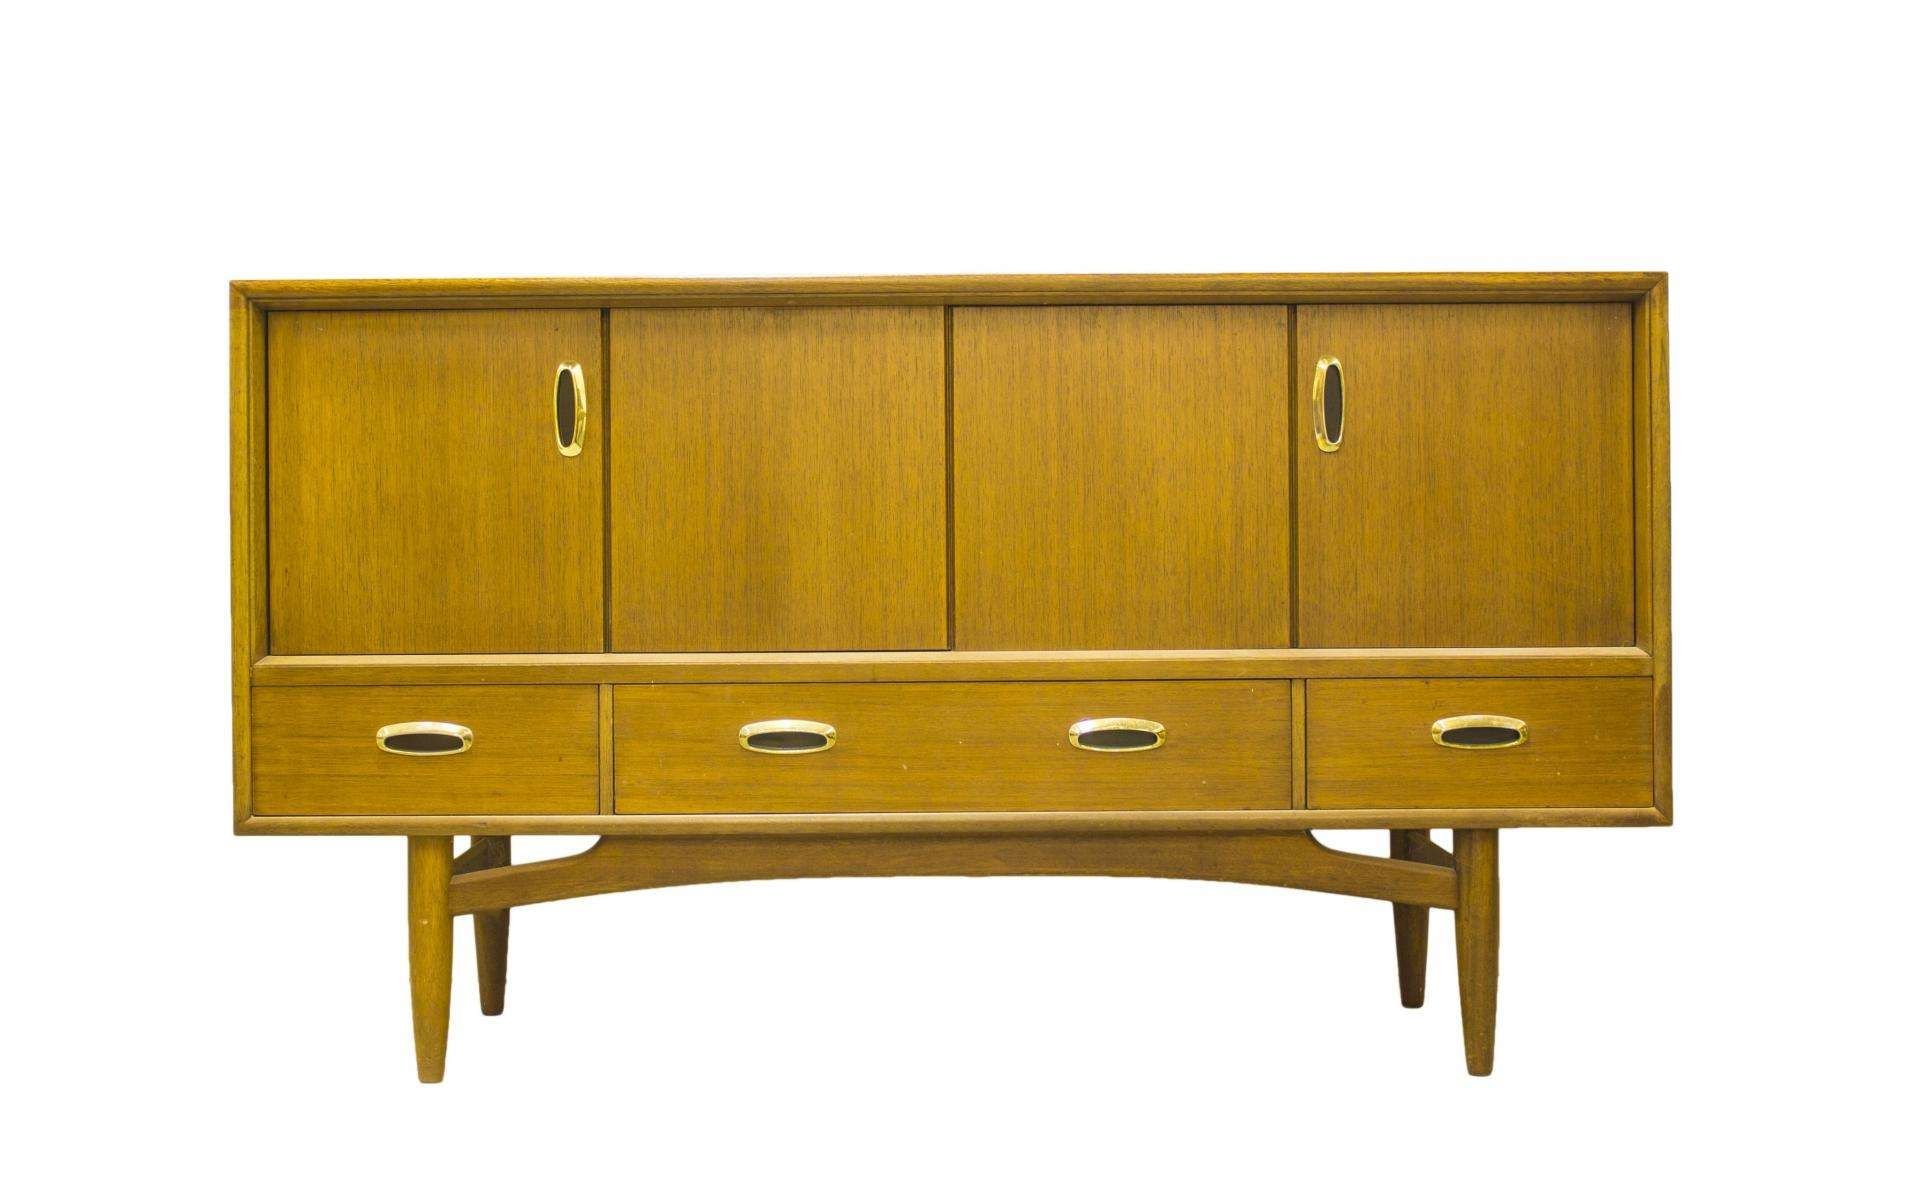 Vintage Scandi Compact Sideboard From G Plan For Sale At Pamono Throughout G Plan Vintage Sideboards (View 9 of 20)